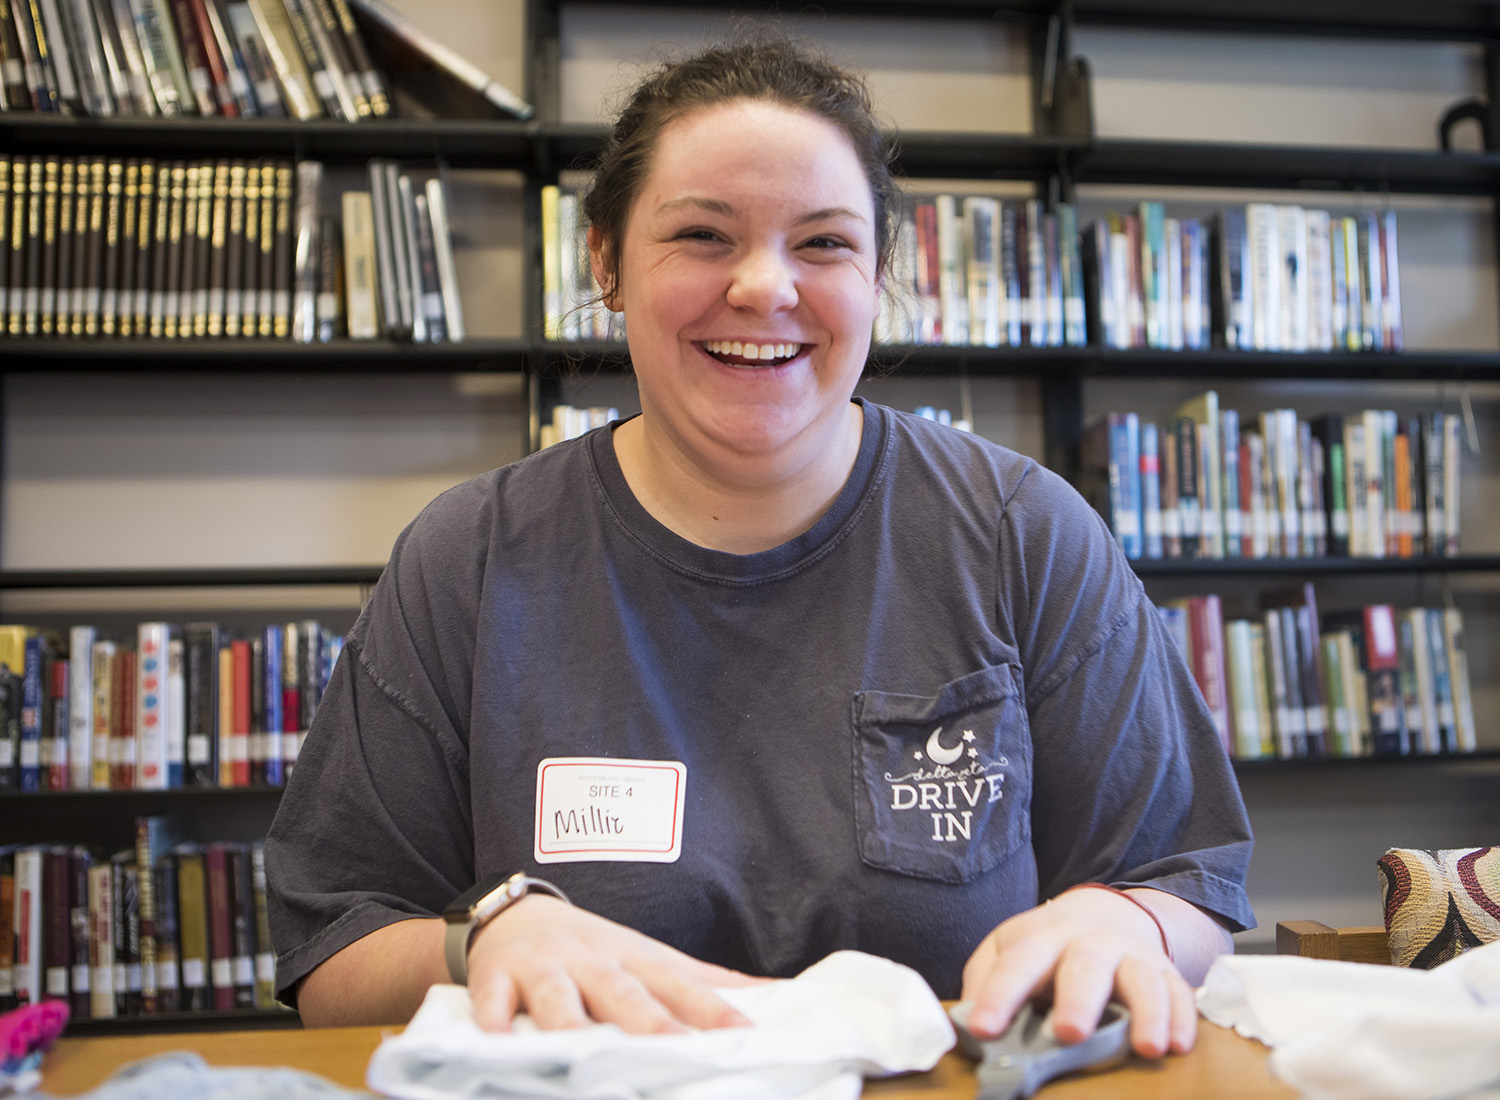 Student volunteer at Whitesburg Library